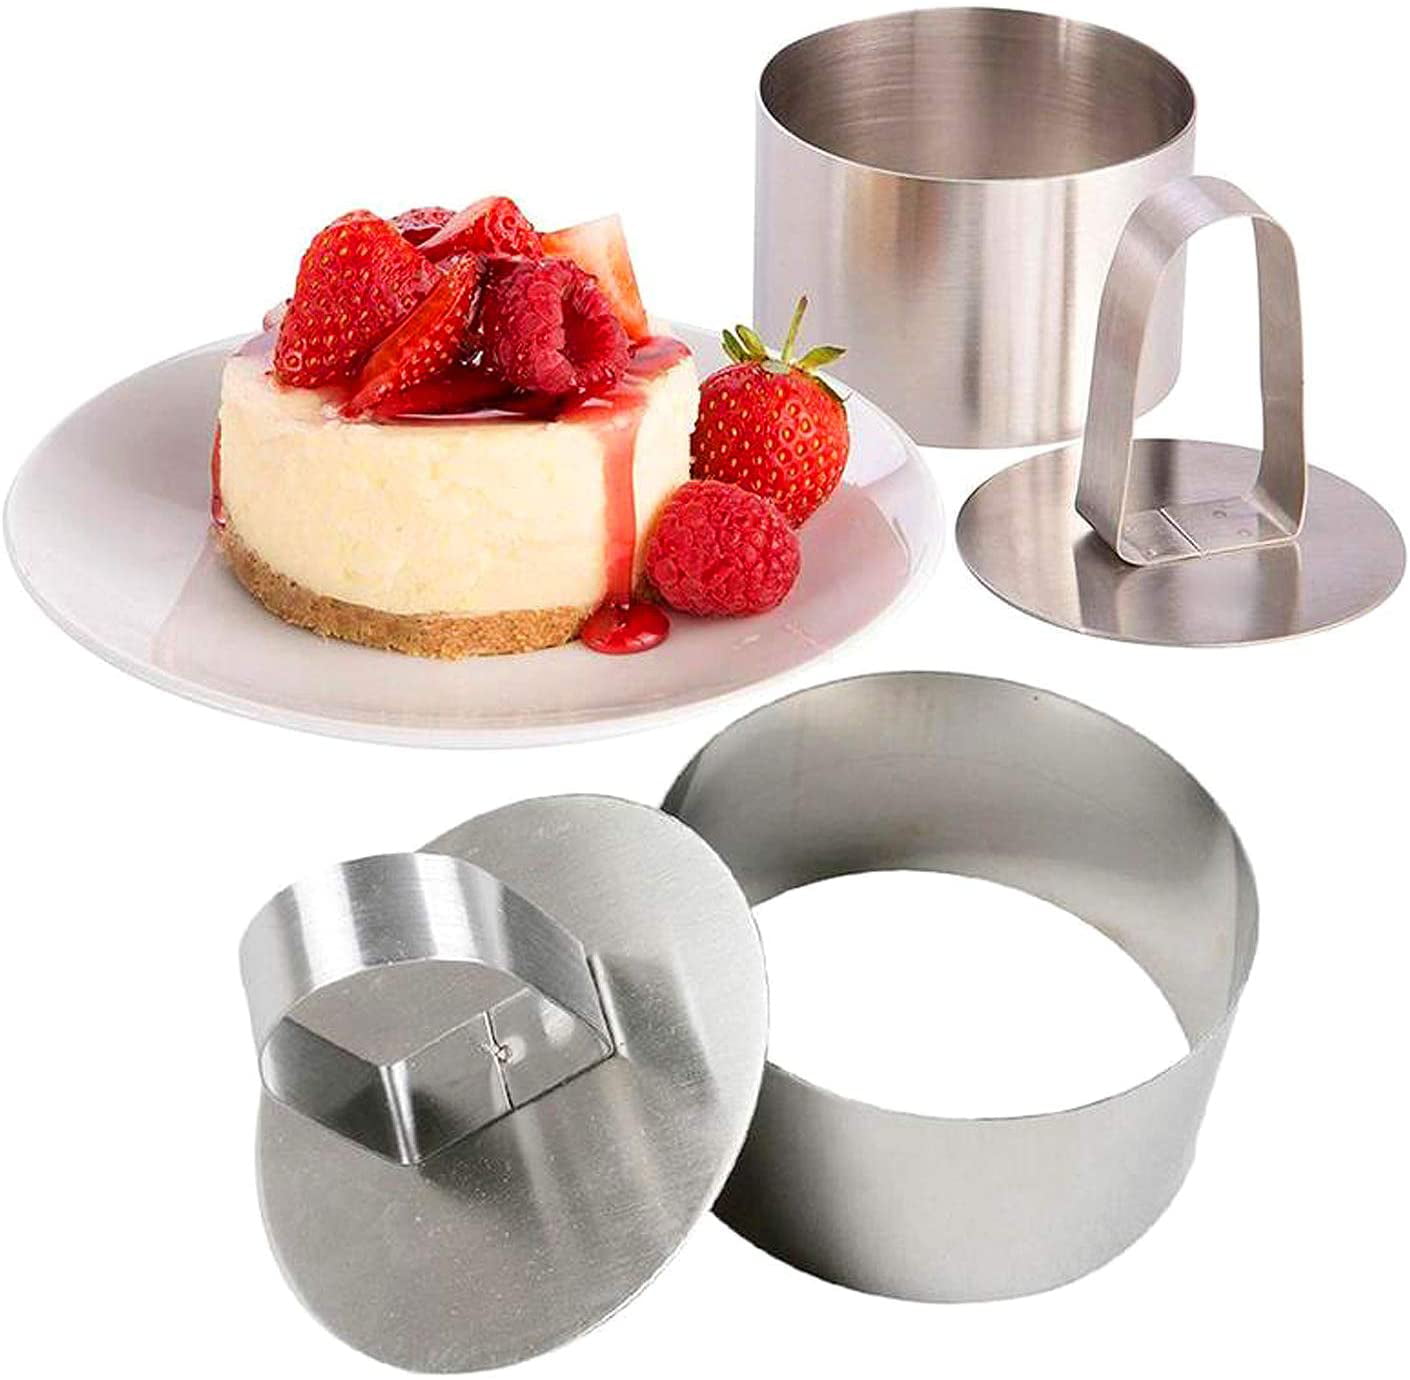  GANAZONO 12 Pcs round mousse circle kitchen aesthetics tool  tartlet baking tin mousse ring forming ring molds cookie shapes round cake  pan frost form Stainless steel Round 3d egg tart 